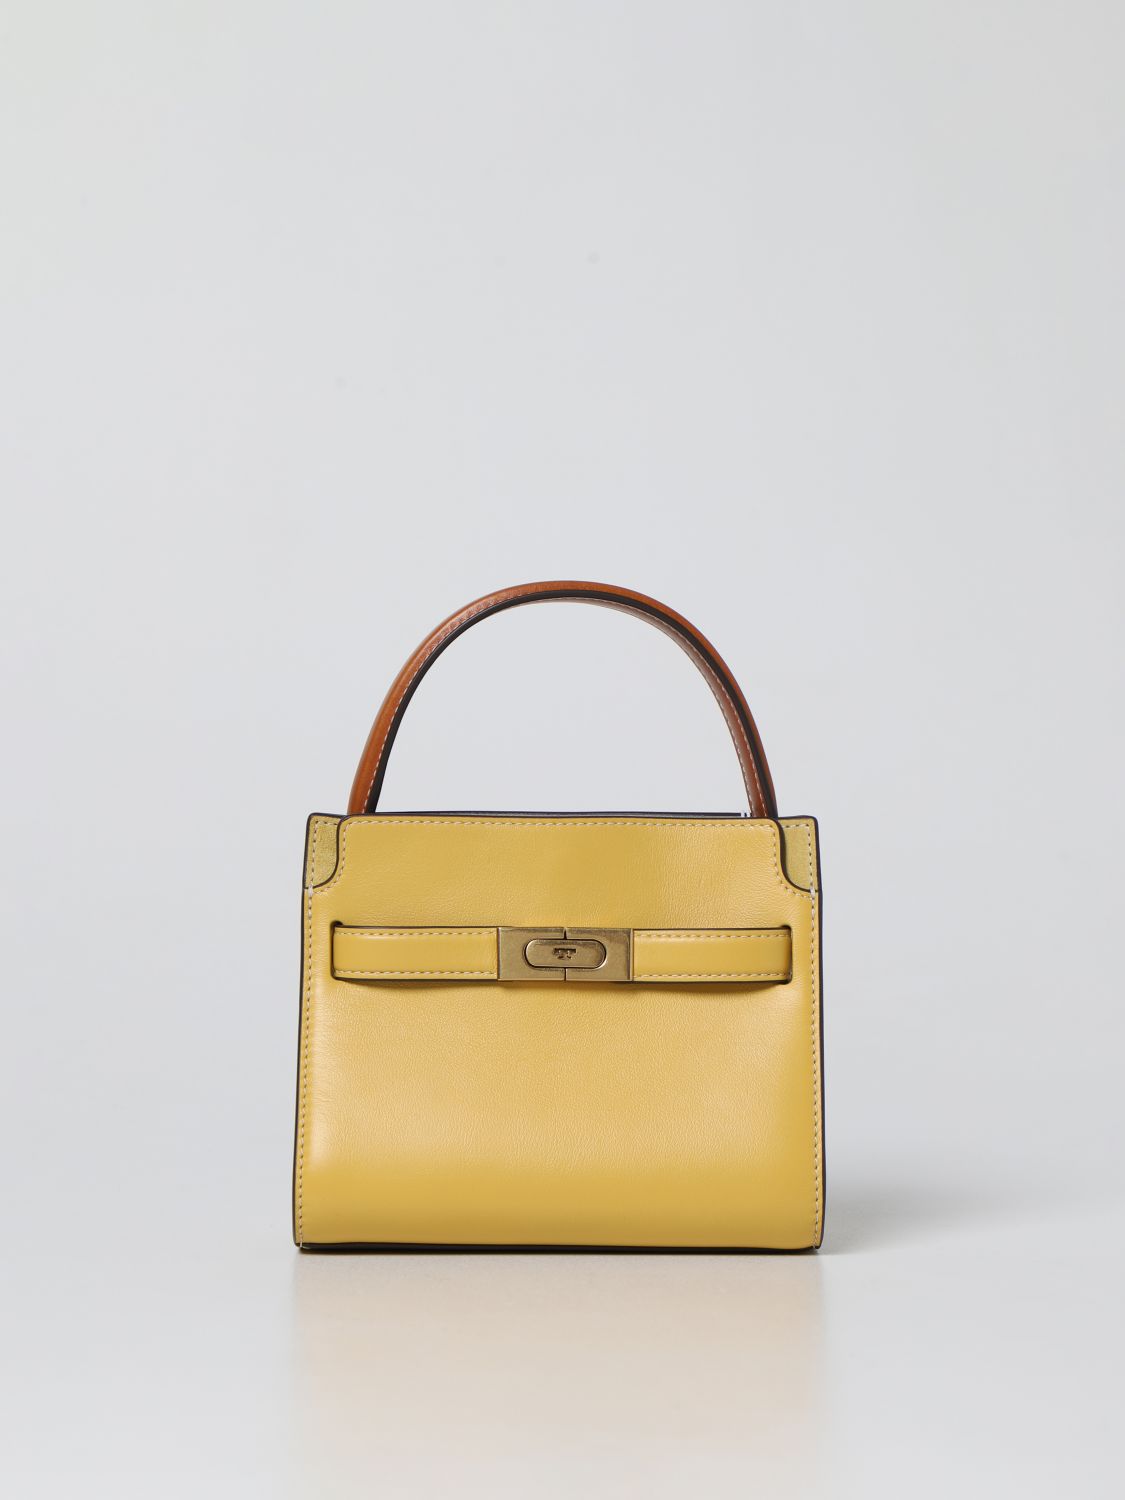 TORY BURCH: Petite Double Lee Radziwill bag in smooth leather and suede -  Yellow